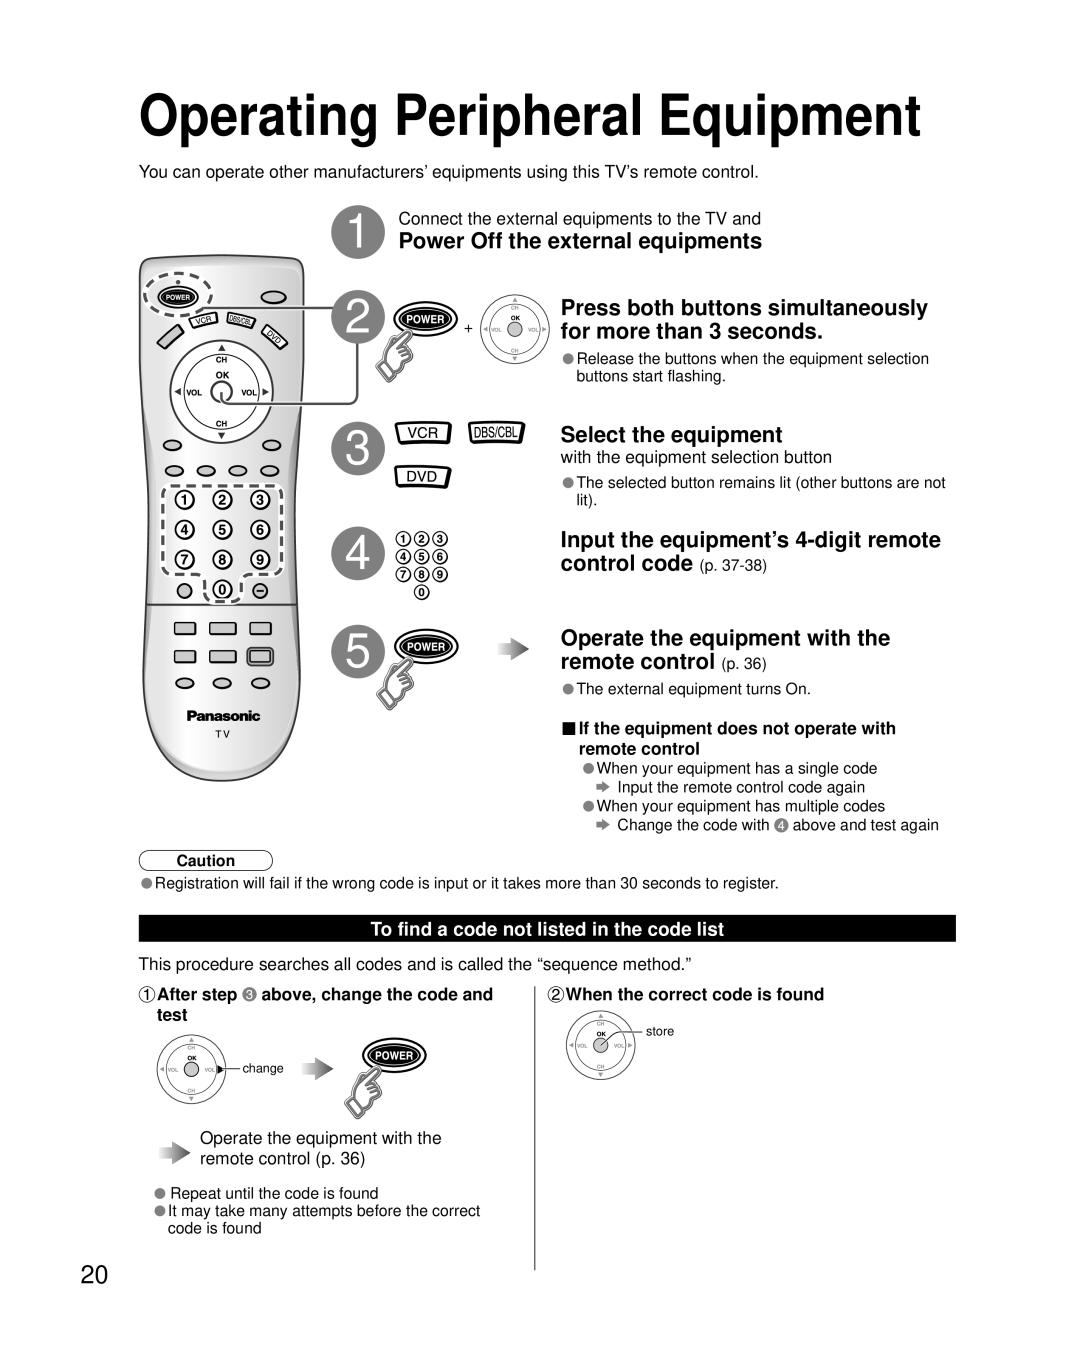 Panasonic TC 26LX600 operating instructions Operating Peripheral Equipment, To find a code not listed in the code list 